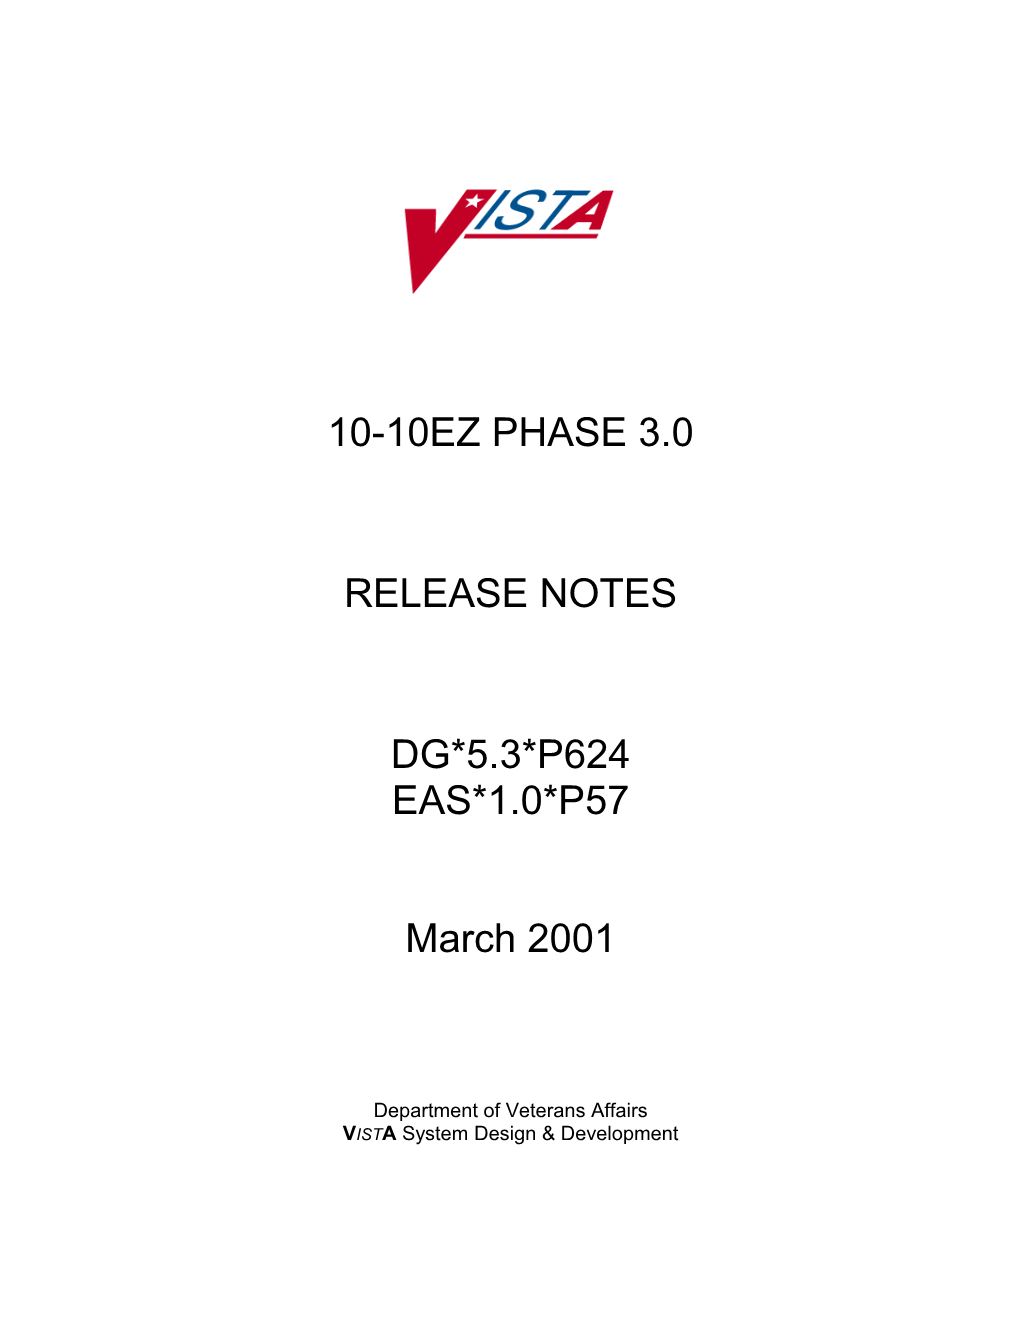 HVE Phase 2 Release Notes